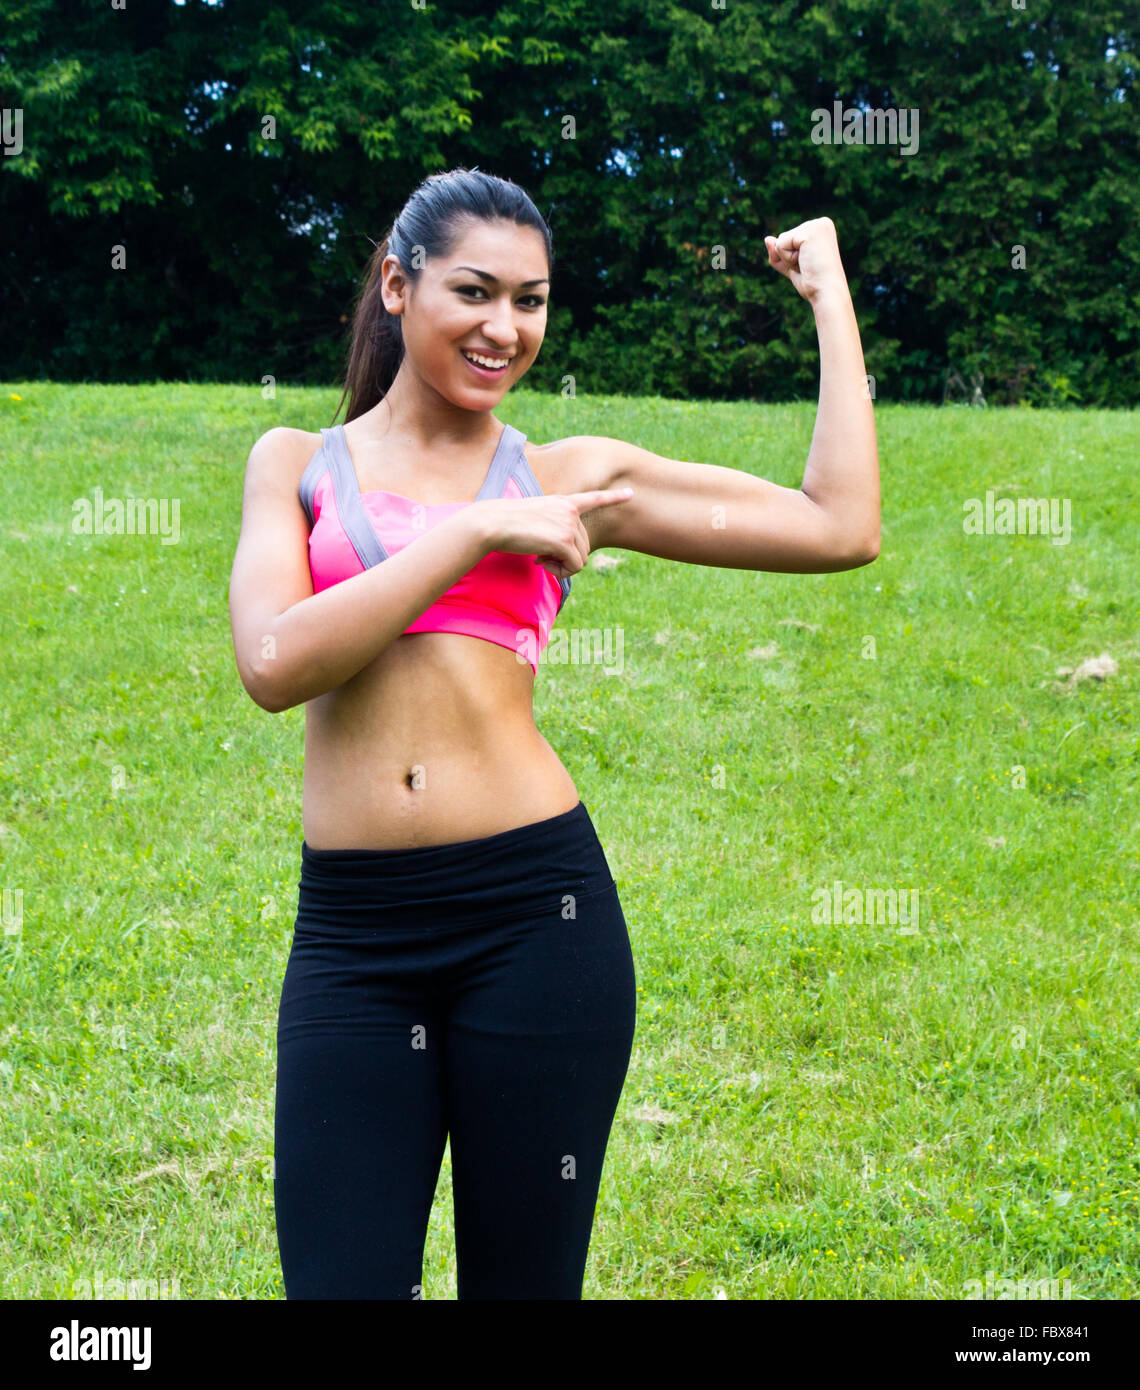 Young fit woman flexes her muscles Stock Photo